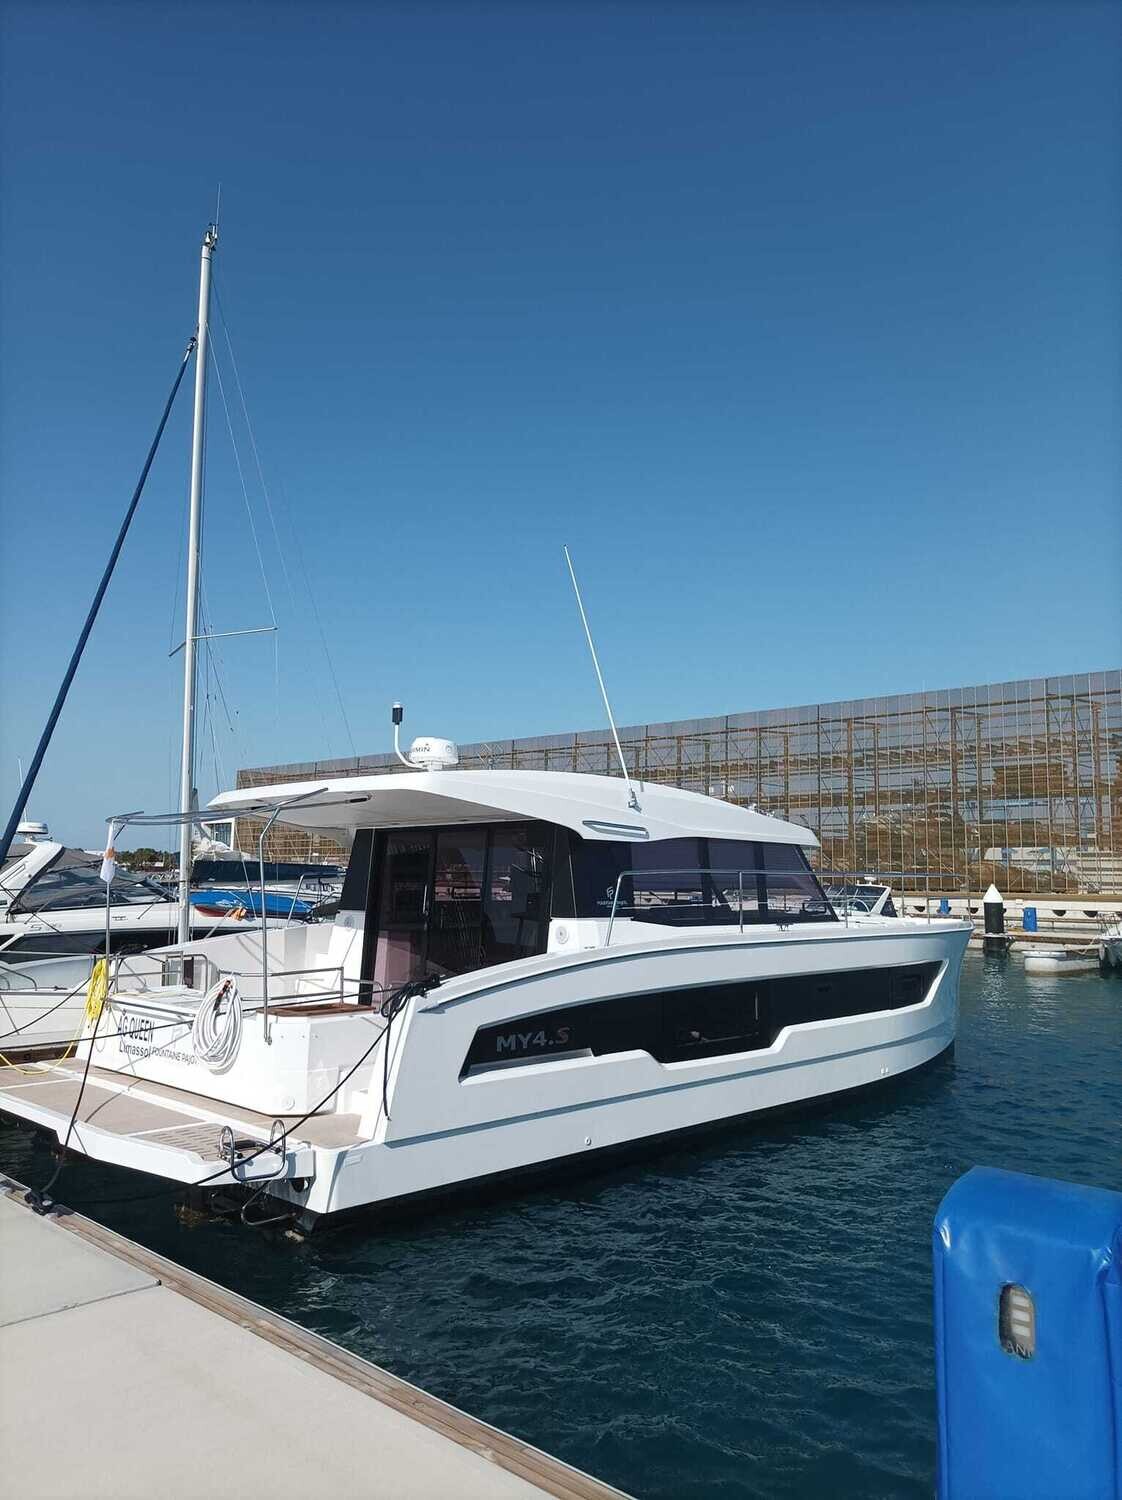 2 day and overnight Private Boat Charter Ayia Napa Fountaine Pajot MY4s Catamaran